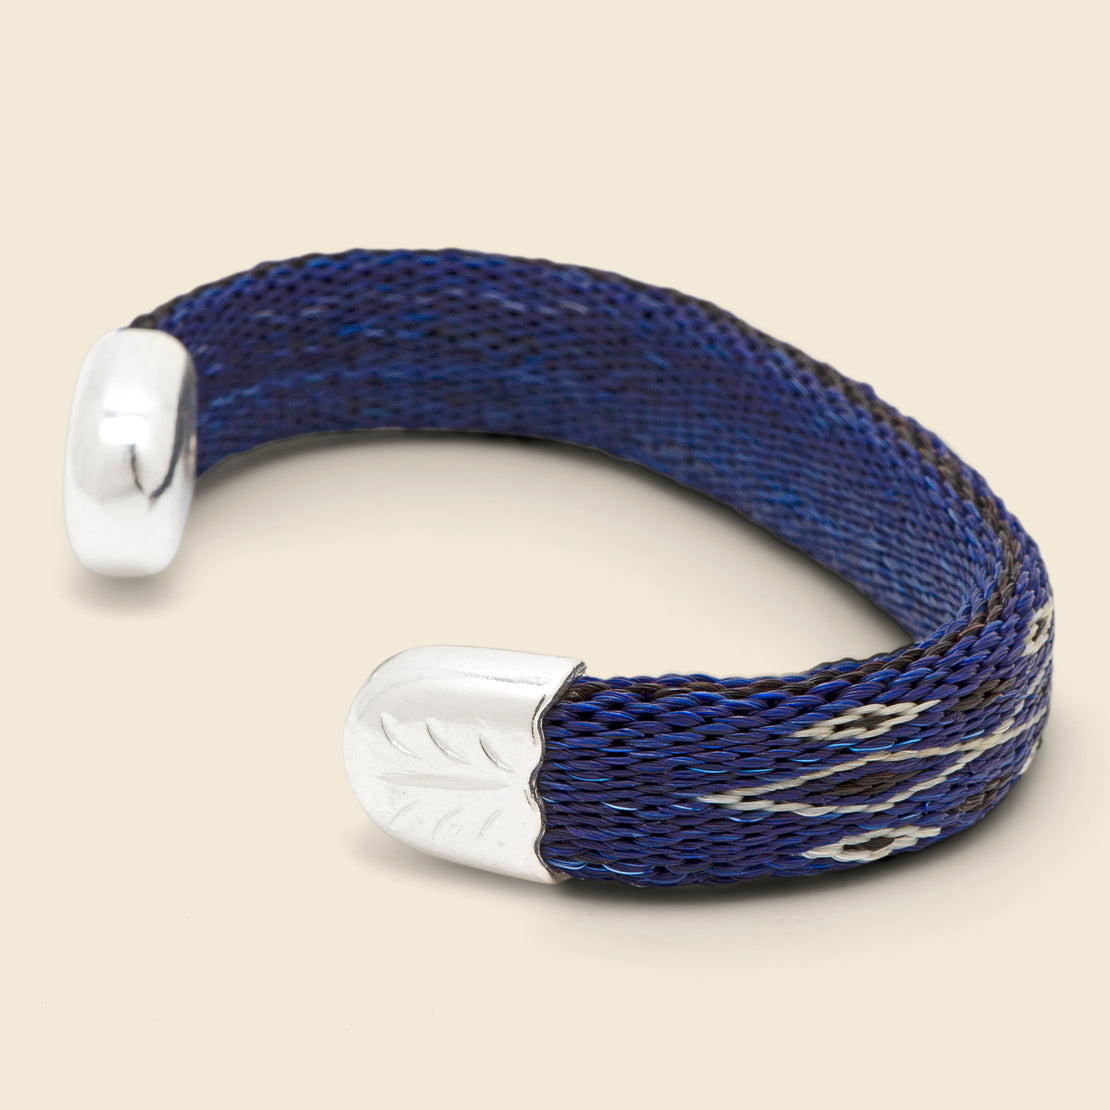 Bendable Horsehair Bracelet - Blue/White/Black - Chamula - STAG Provisions - Accessories - Cuffs